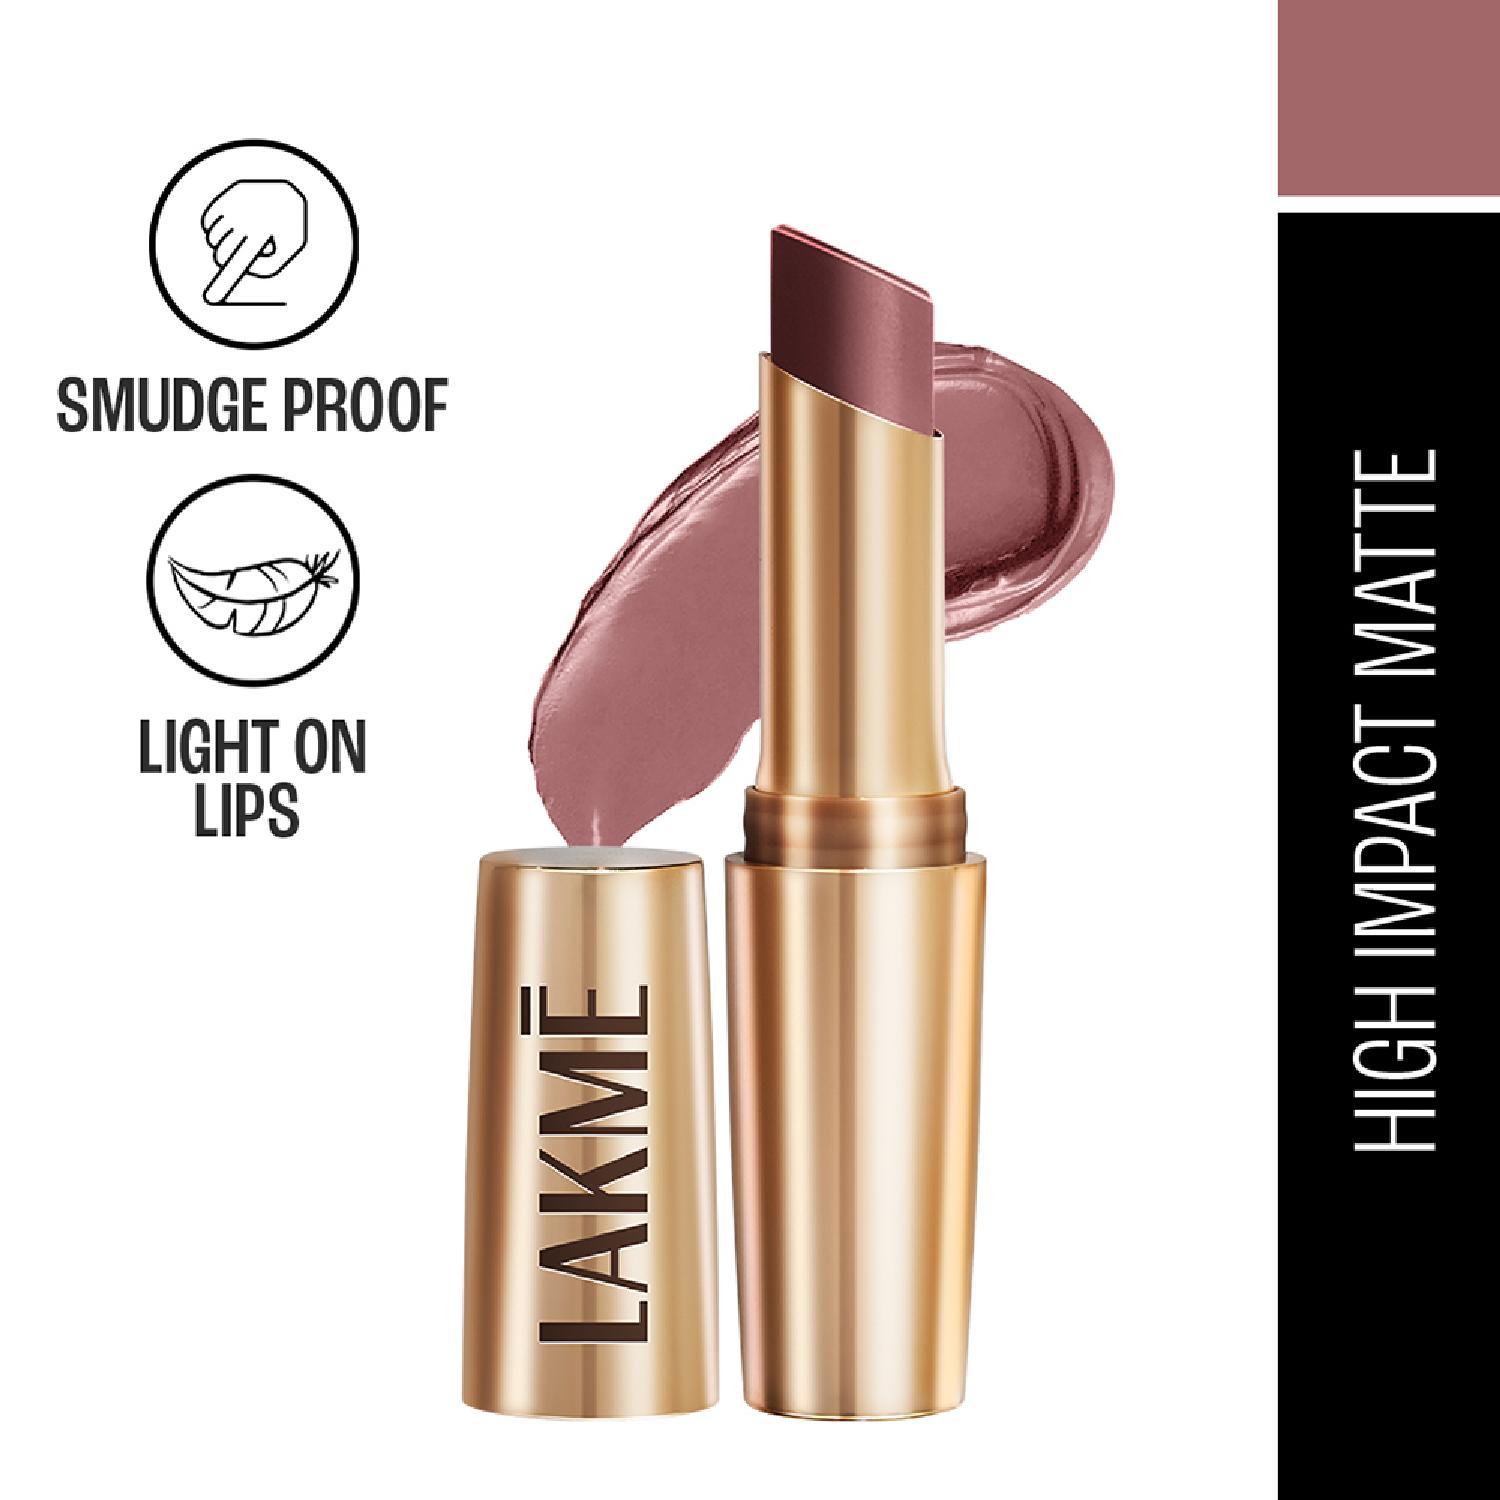 Lakme 9 to 5 Powerplay Priming Matte Lipstick, Lasts 16hrs, Dusty Pink (3.6g)